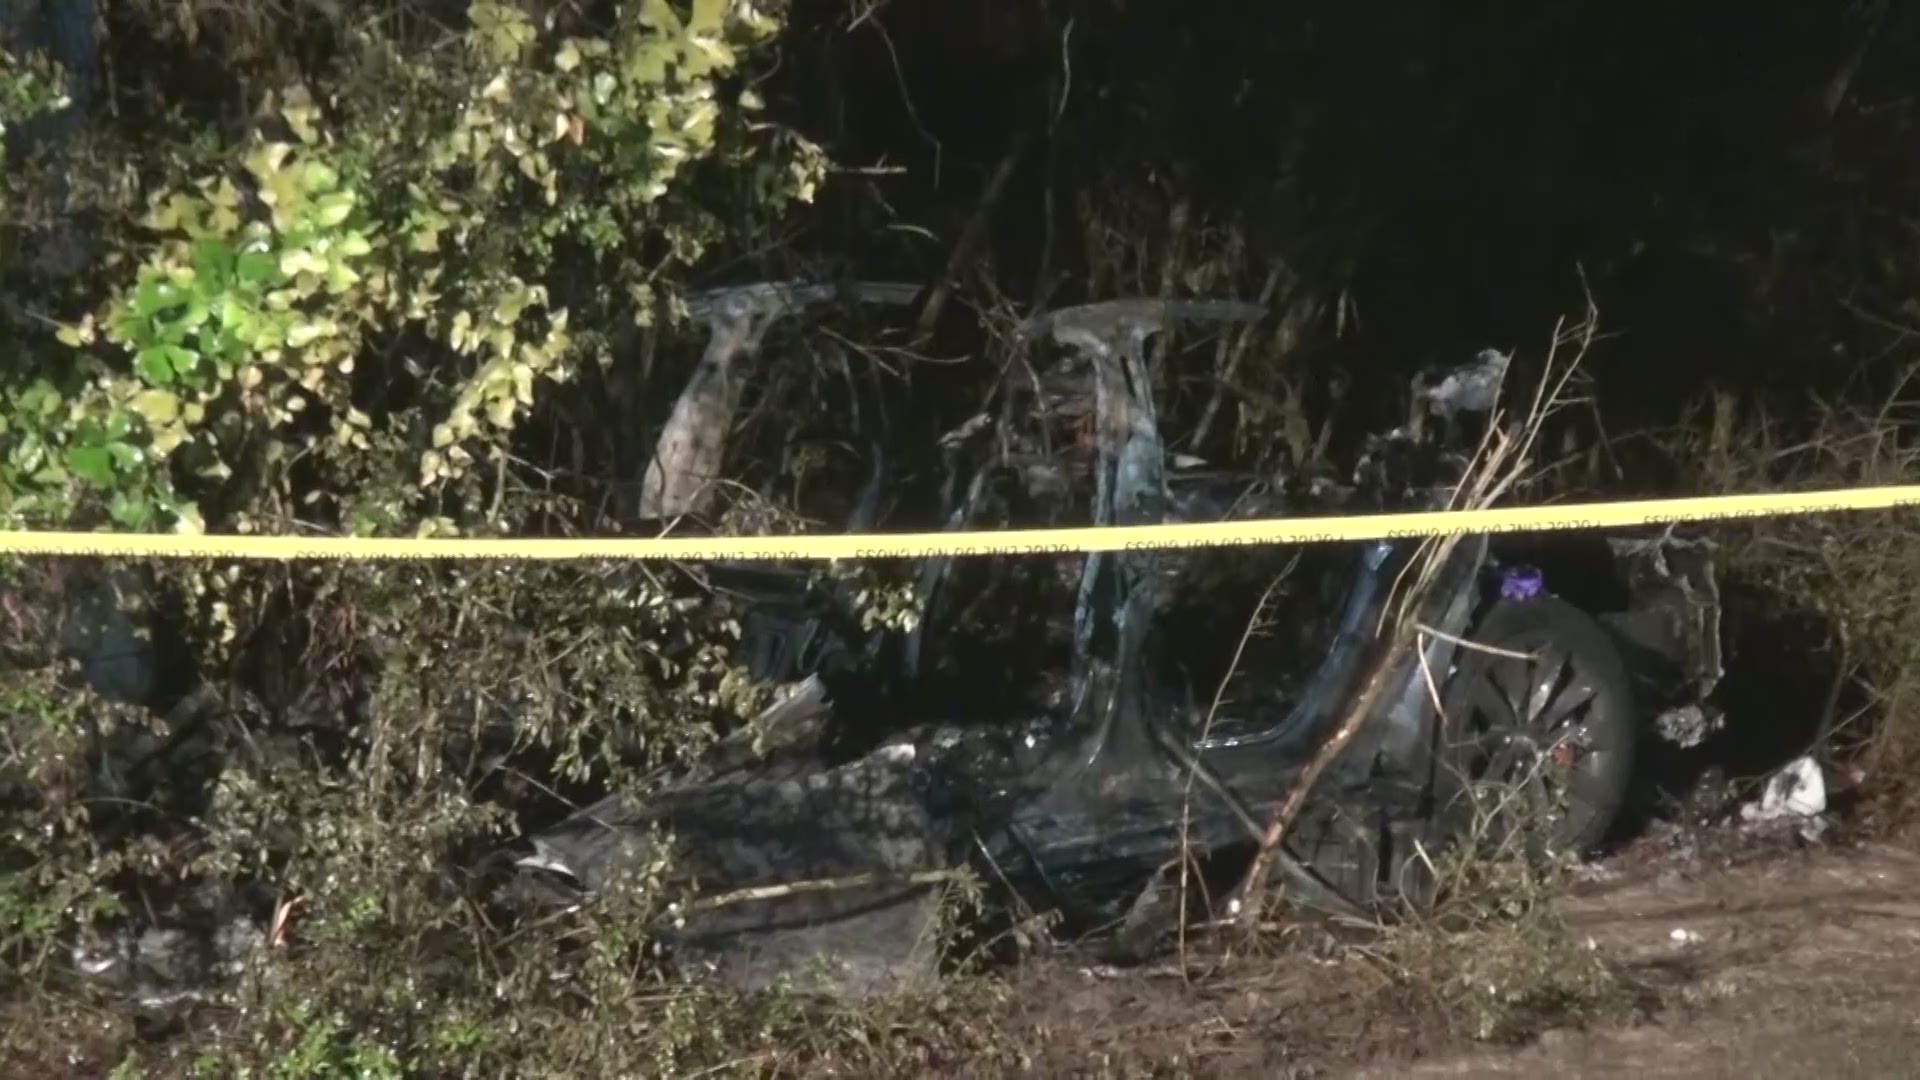 Two people were killed Saturday night after the driverless Tesla they were in crashed into a tree and caught fire, deputies said. It took four hours to put out.